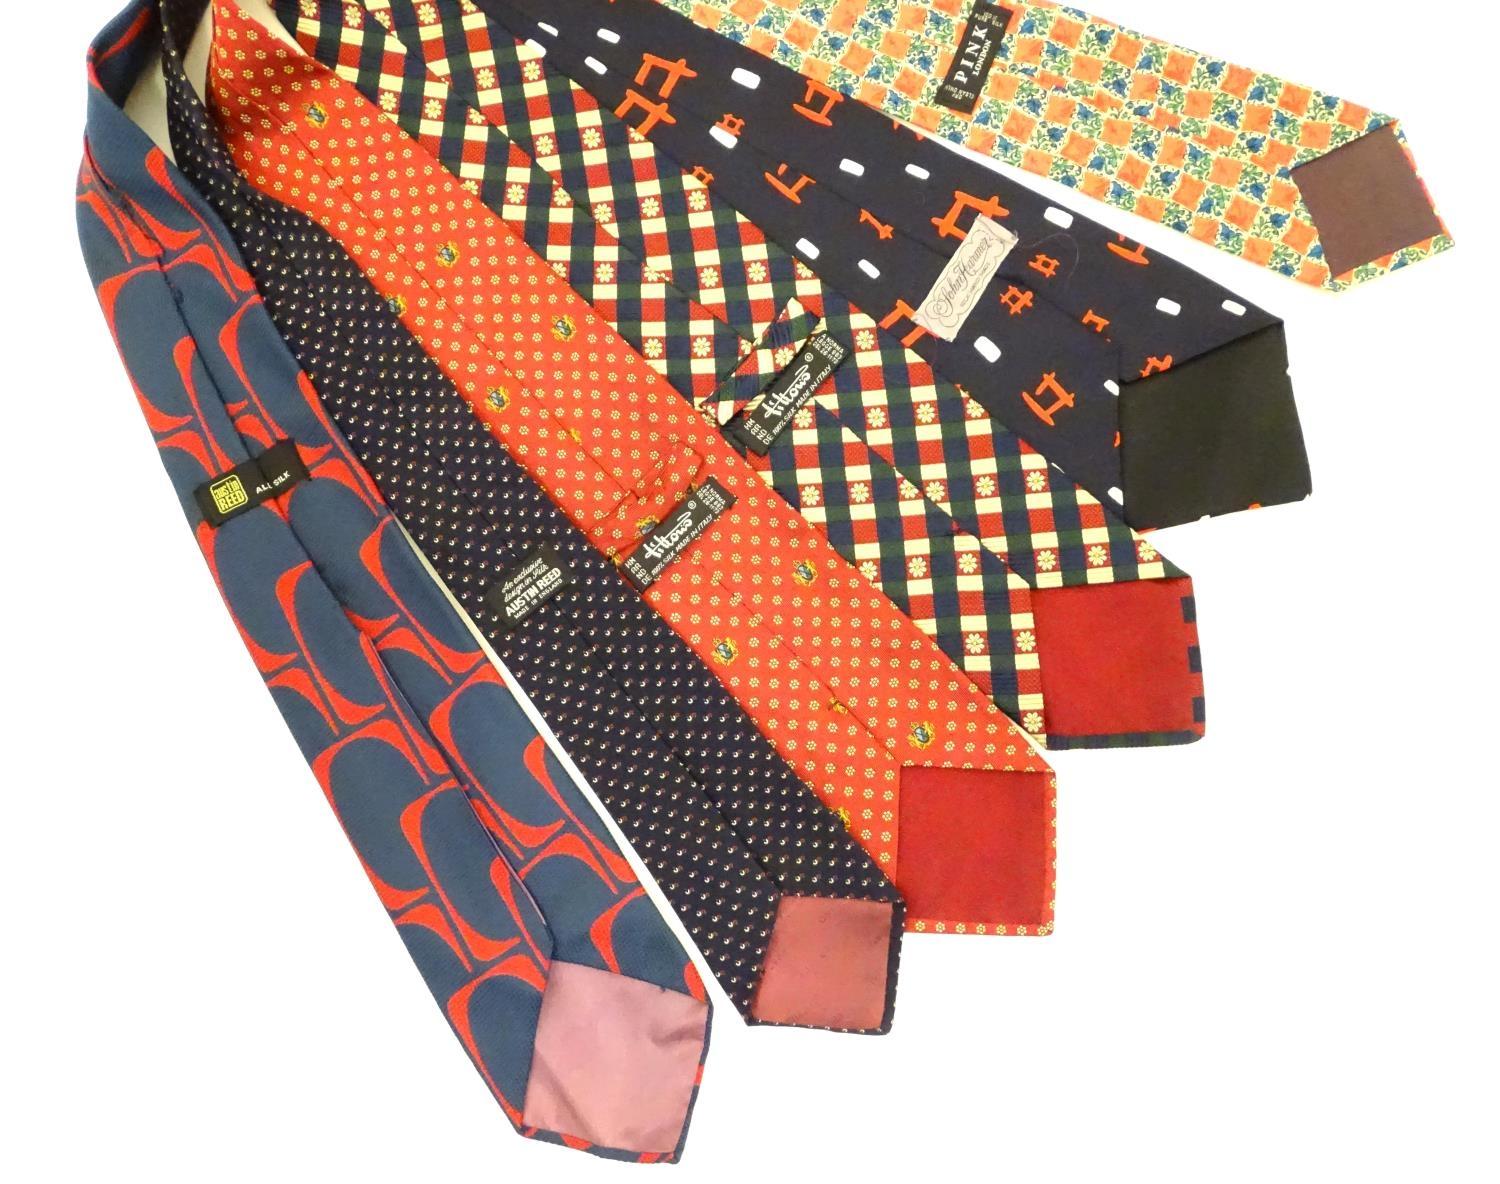 6 silk ties in navy and reds by Austin Reed, Tittorio, Pink and John Harmer (6) Please Note - we - Image 6 of 9